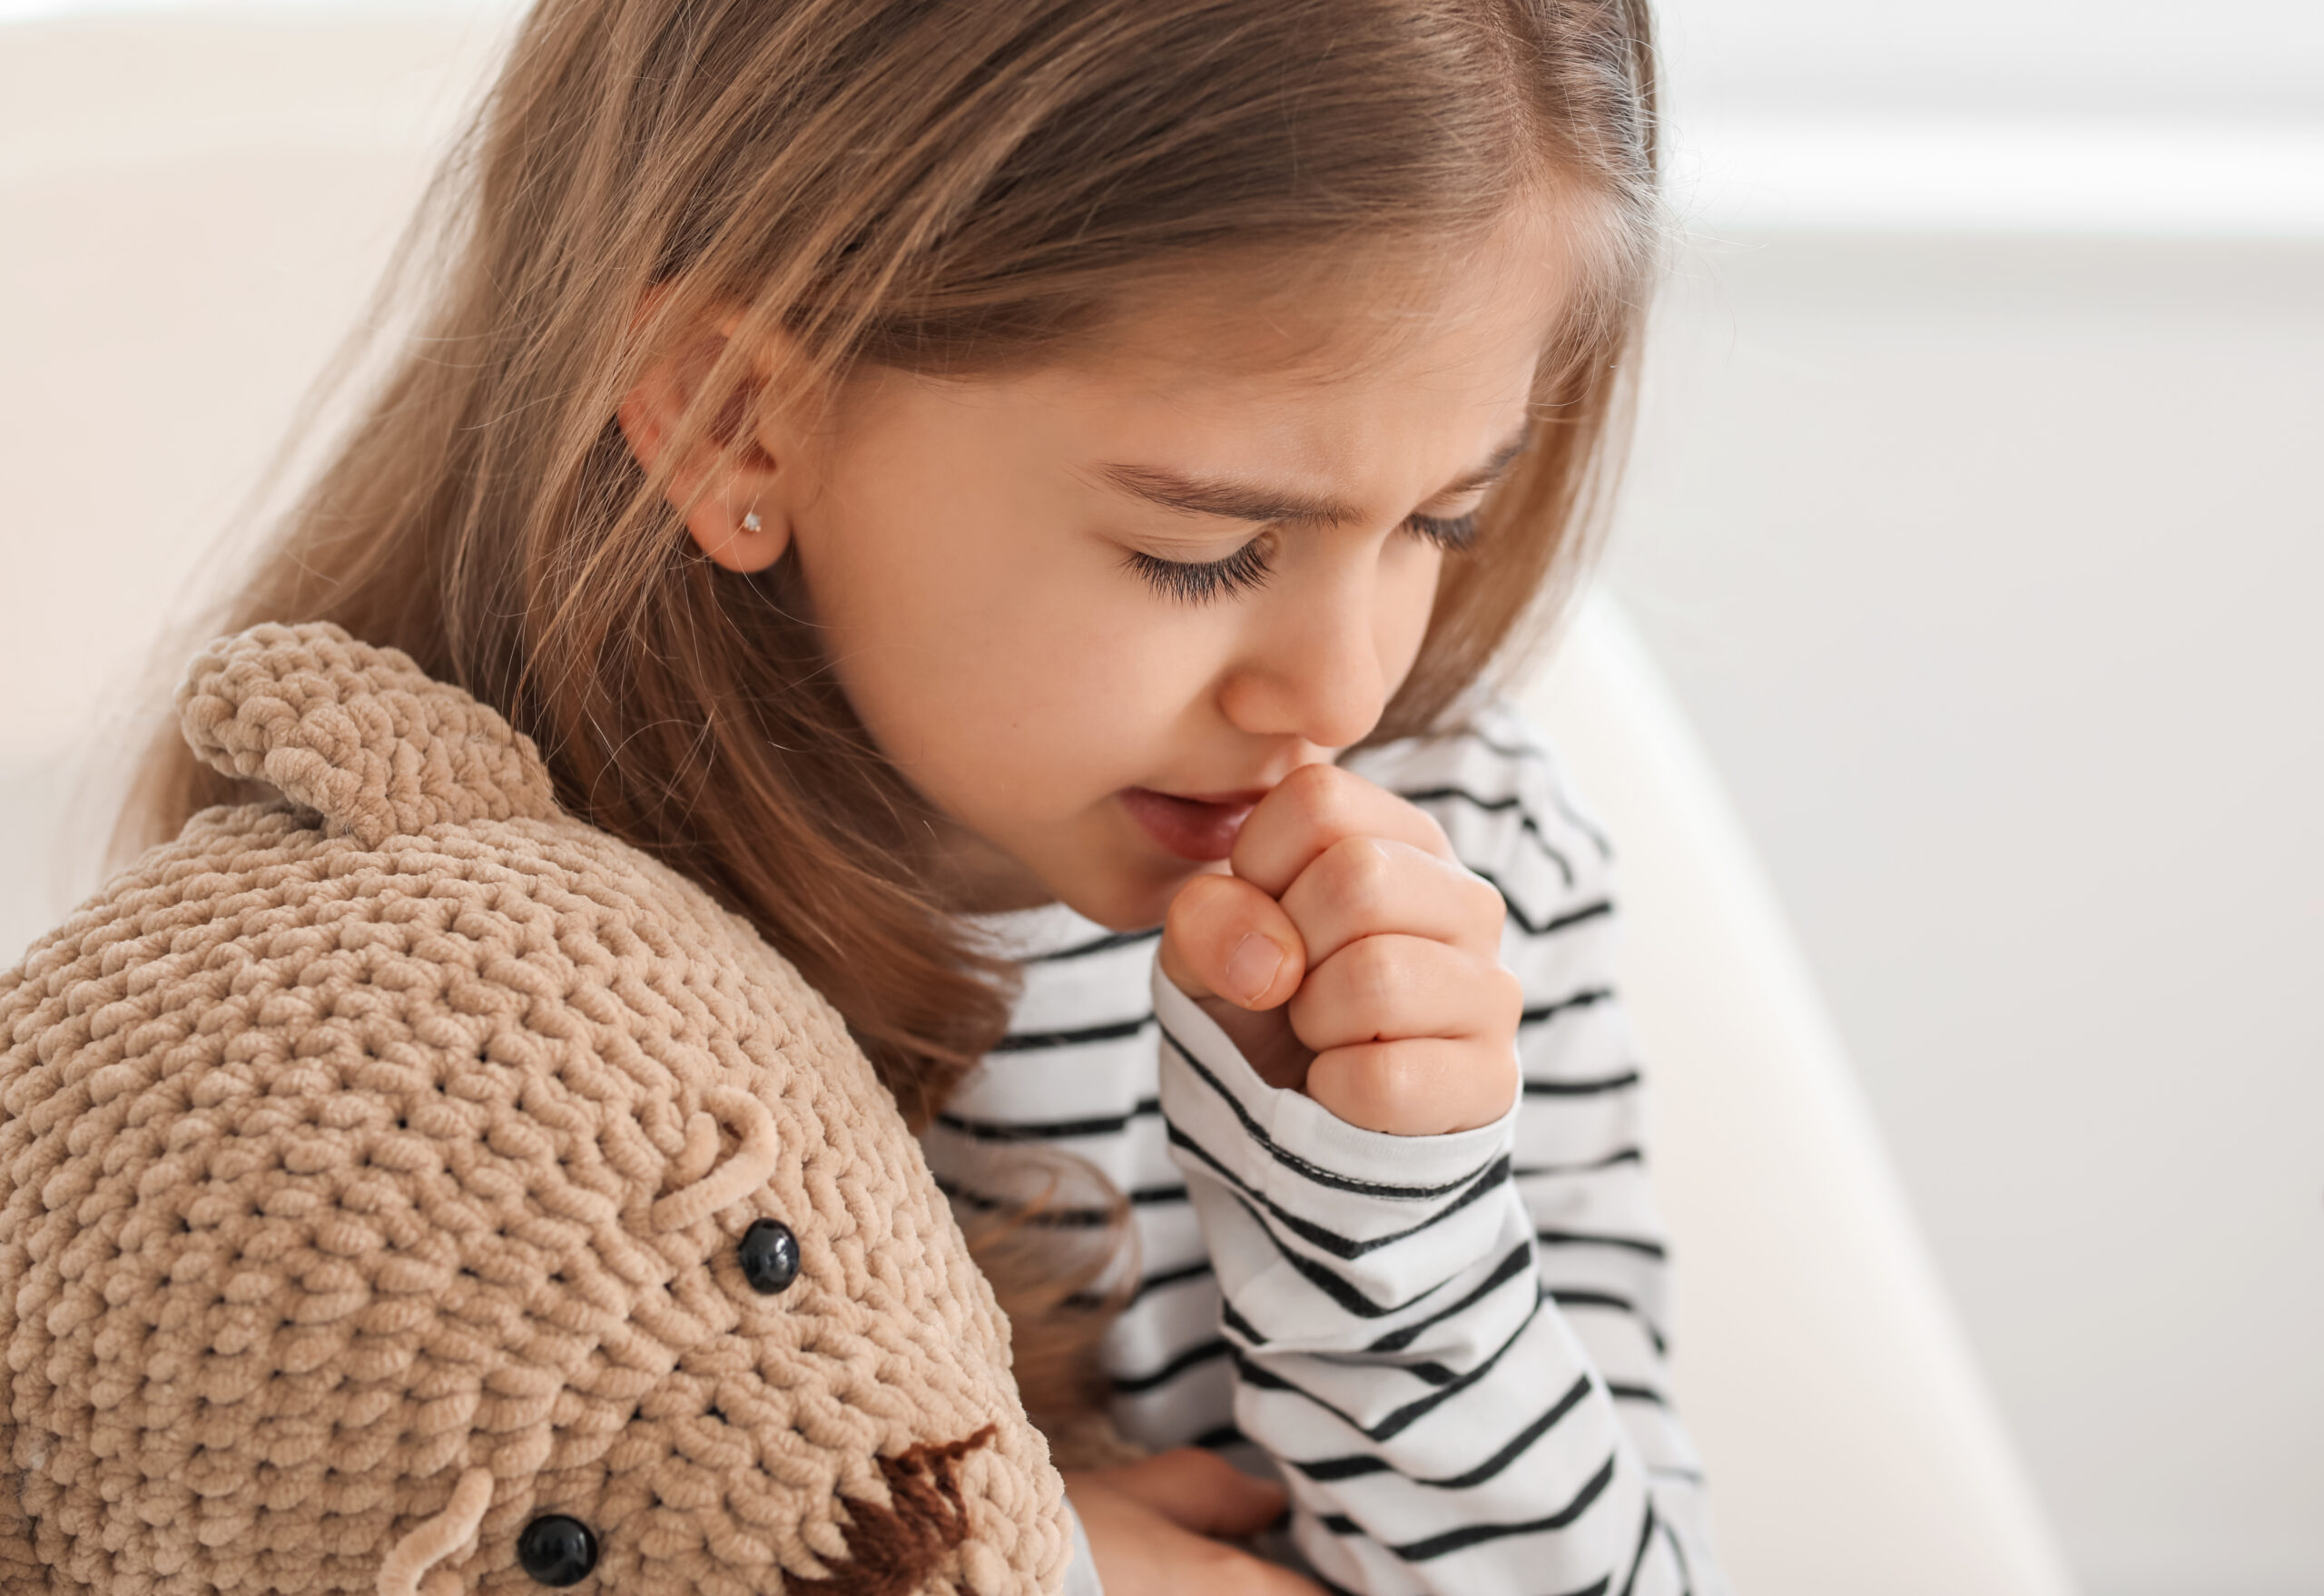 Little girl coughing into her fist while holding her stuffed animal